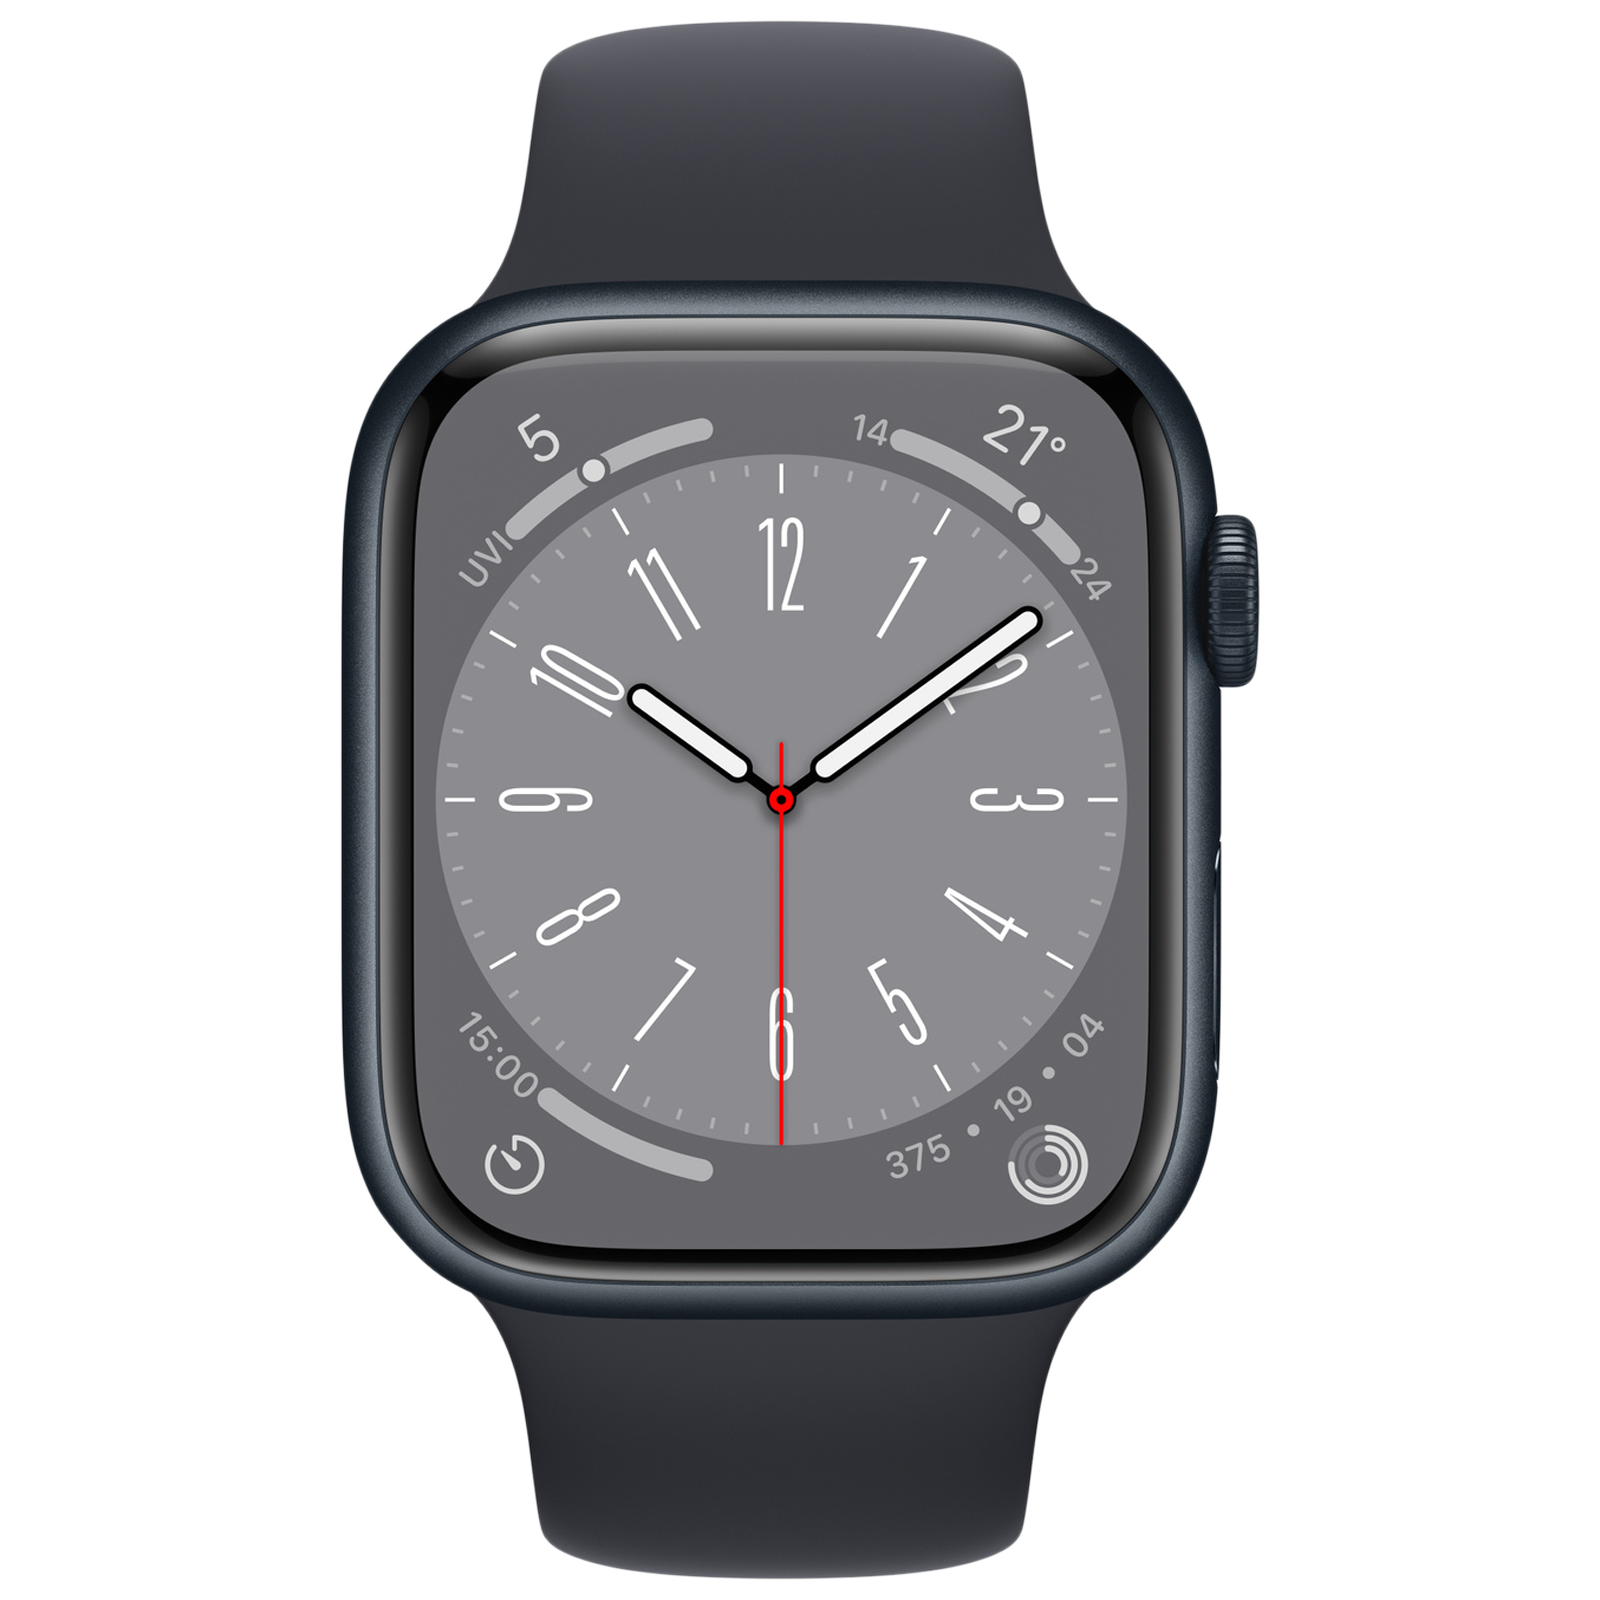 Apple Watch Series 5 44mm Price in India, Full Specifications (6th 